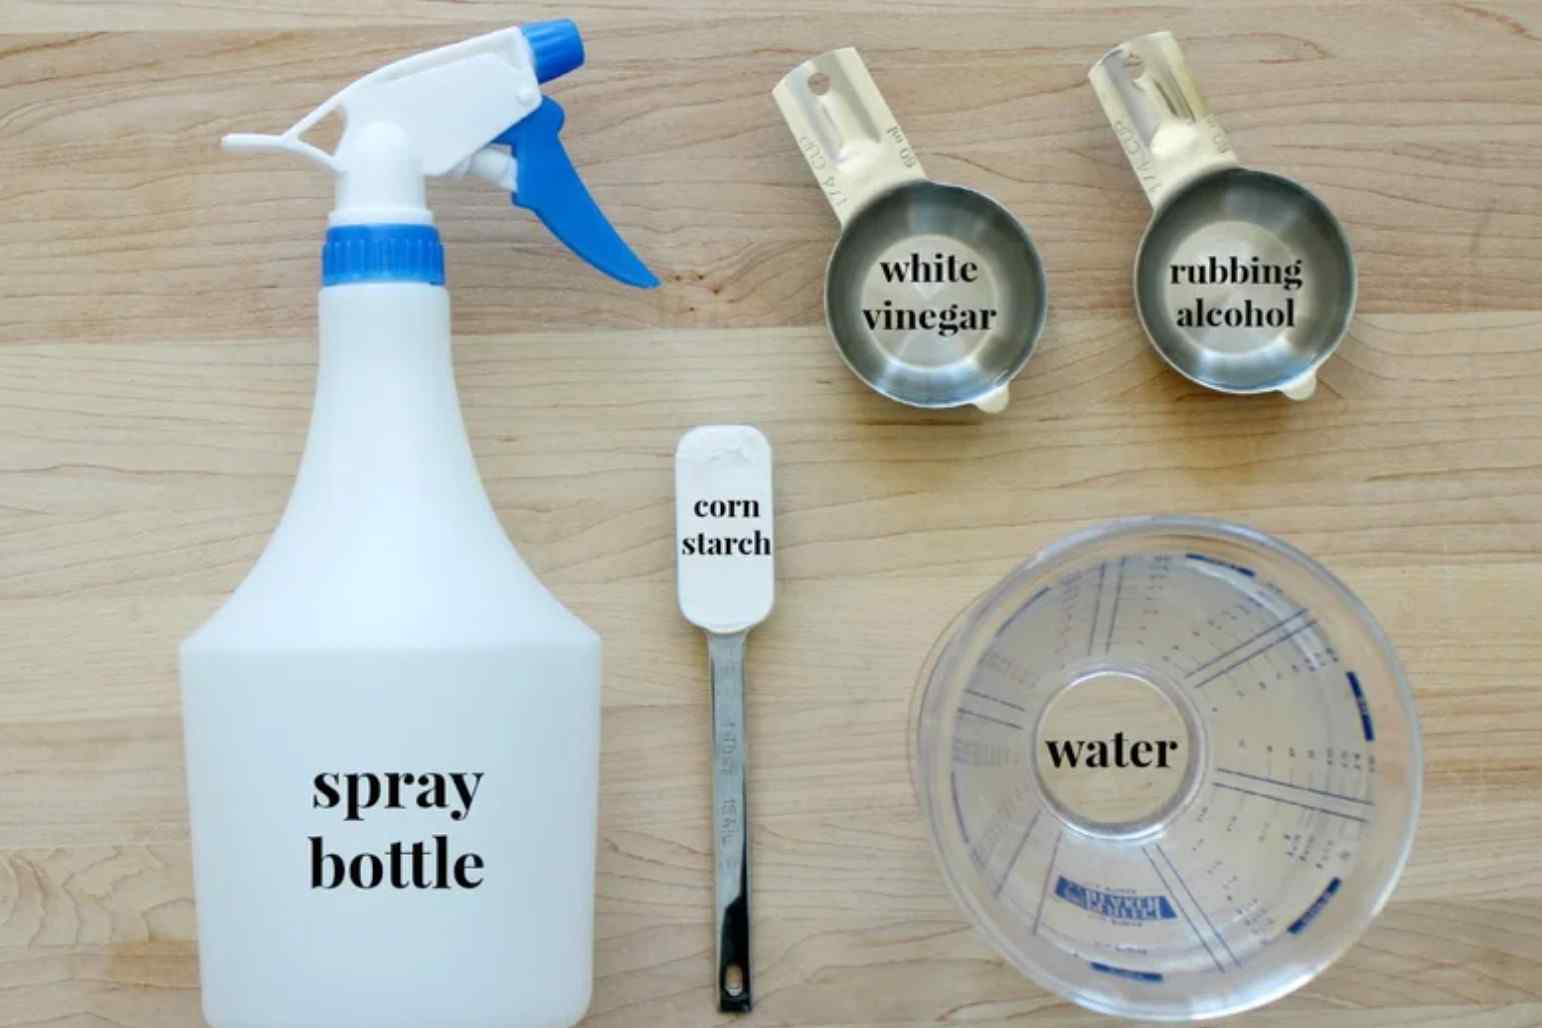 Depending on your preference and cleaning needs, you can select one or more of these ingredients to create a practical, affordable, and eco-friendly cleaning solution.